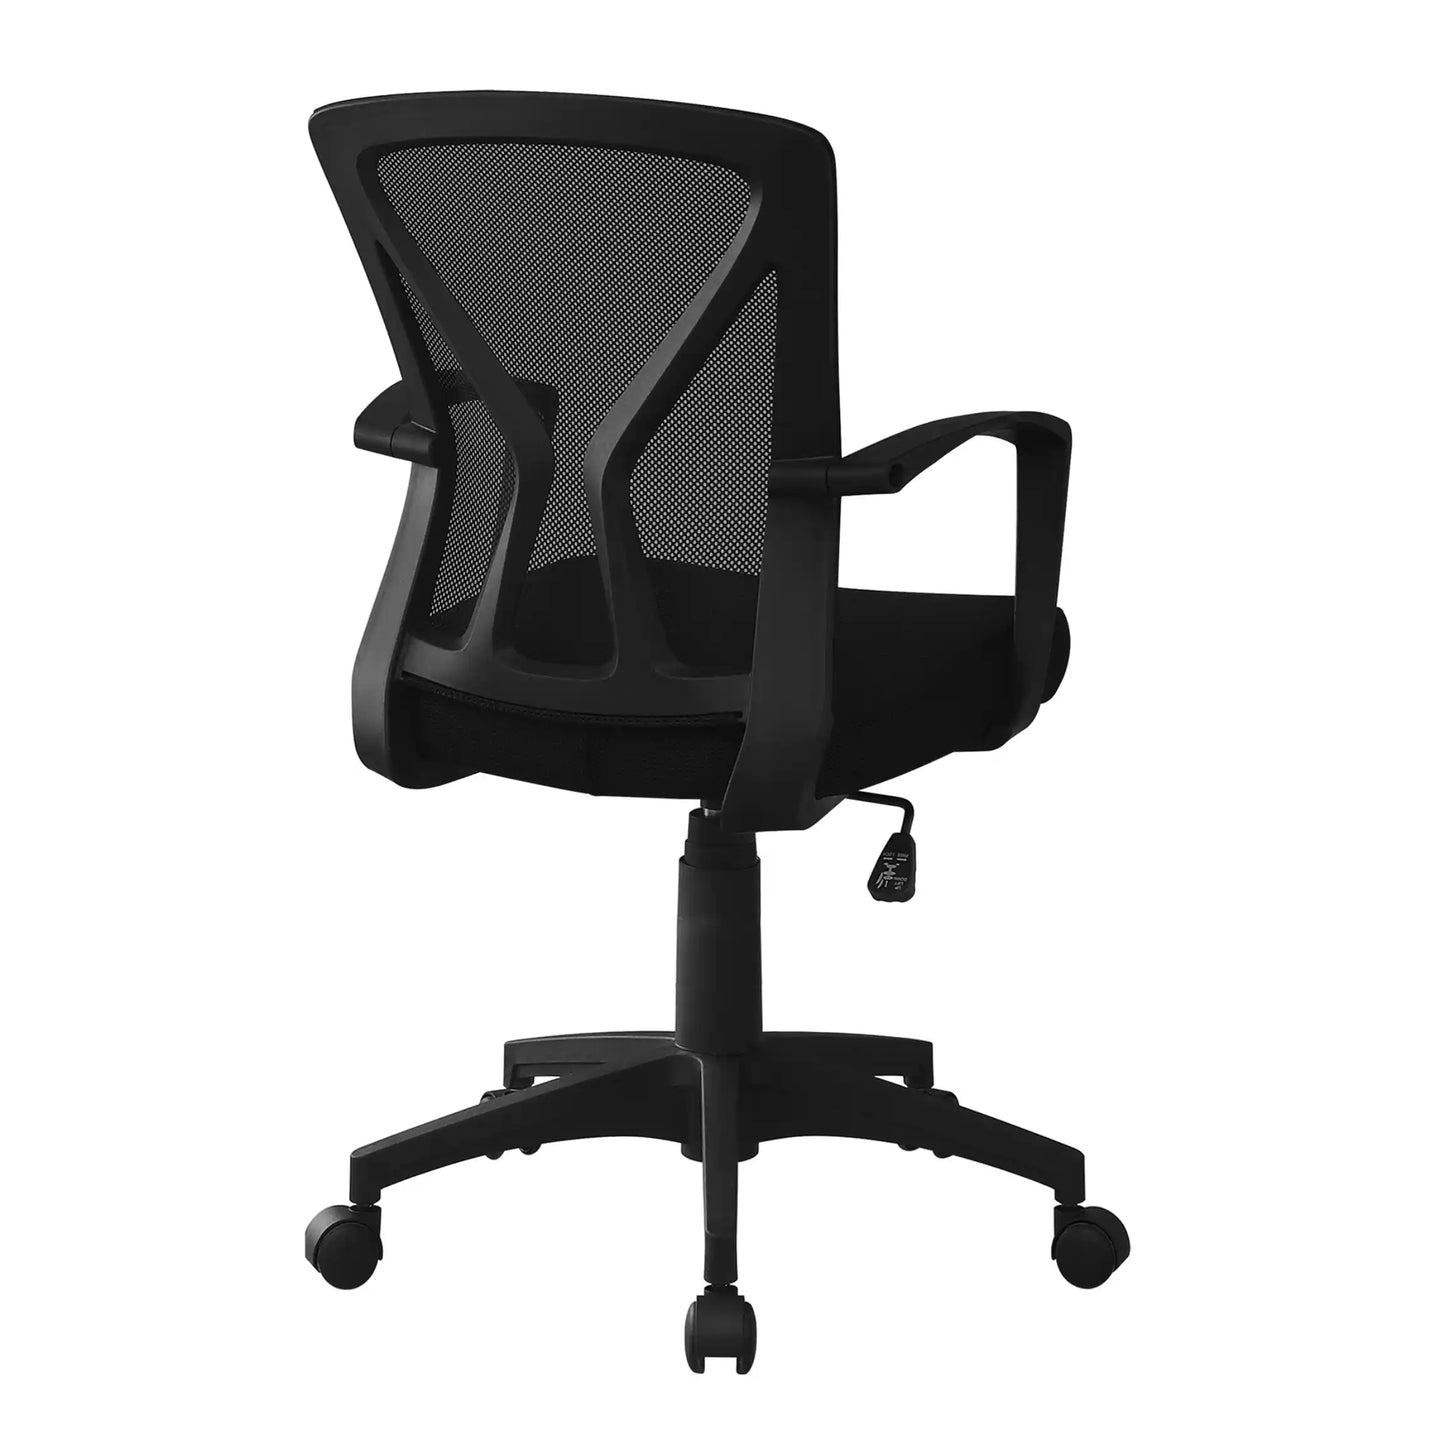 Black Office Chair - I 7339